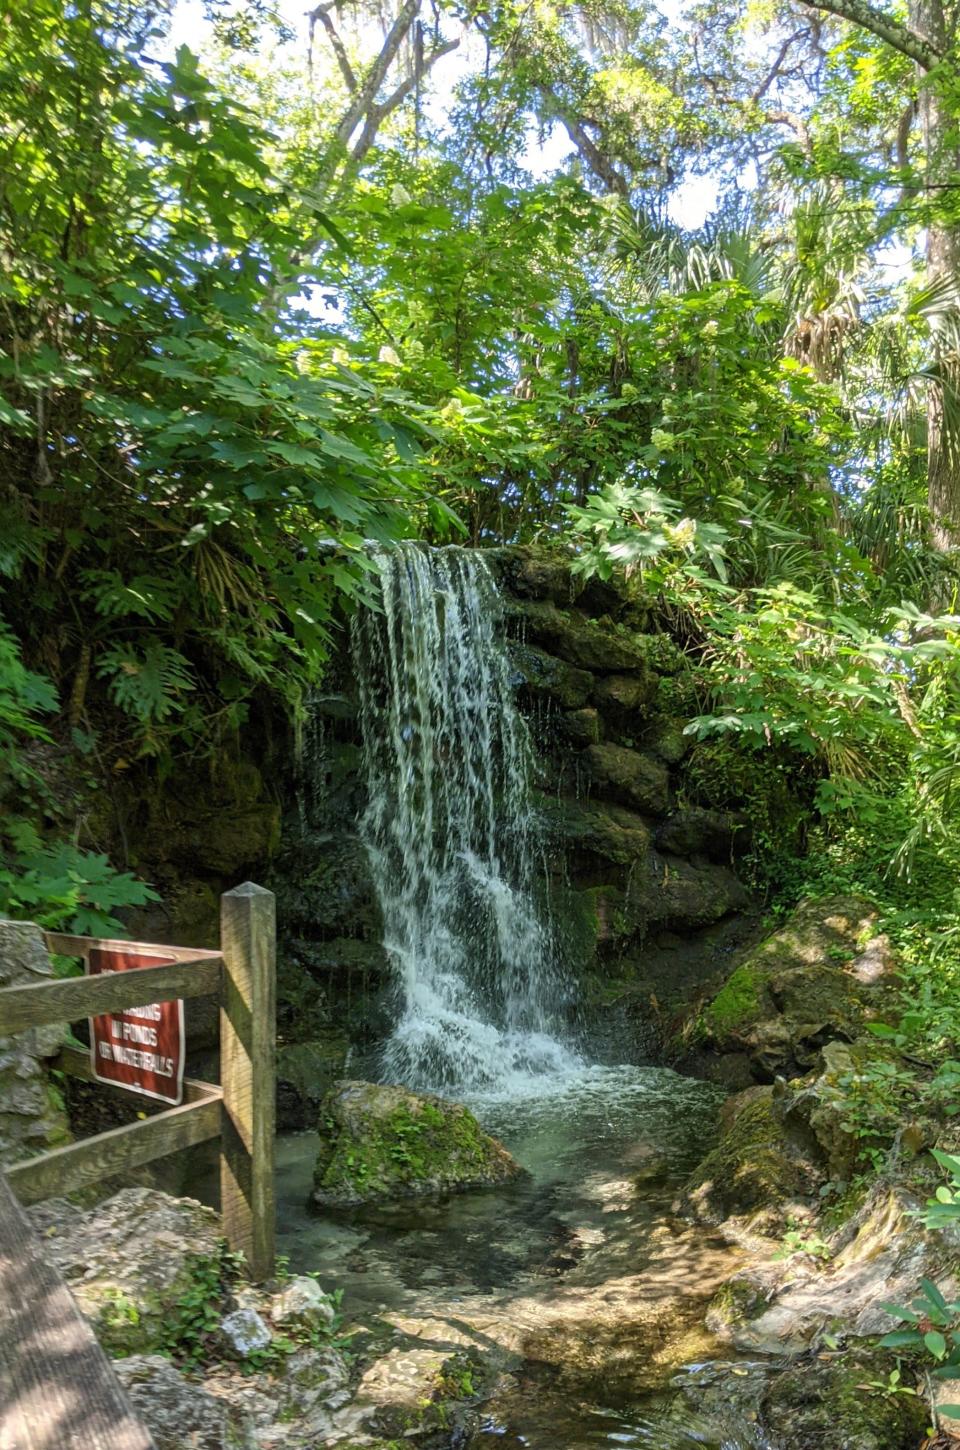 Rainbow Springs is one of the 10 fun hiking trails to hike in Marion County. A waterfall is one of the main attractions on the trail. [Danielle Johnson/Ocala Star Banner]2021